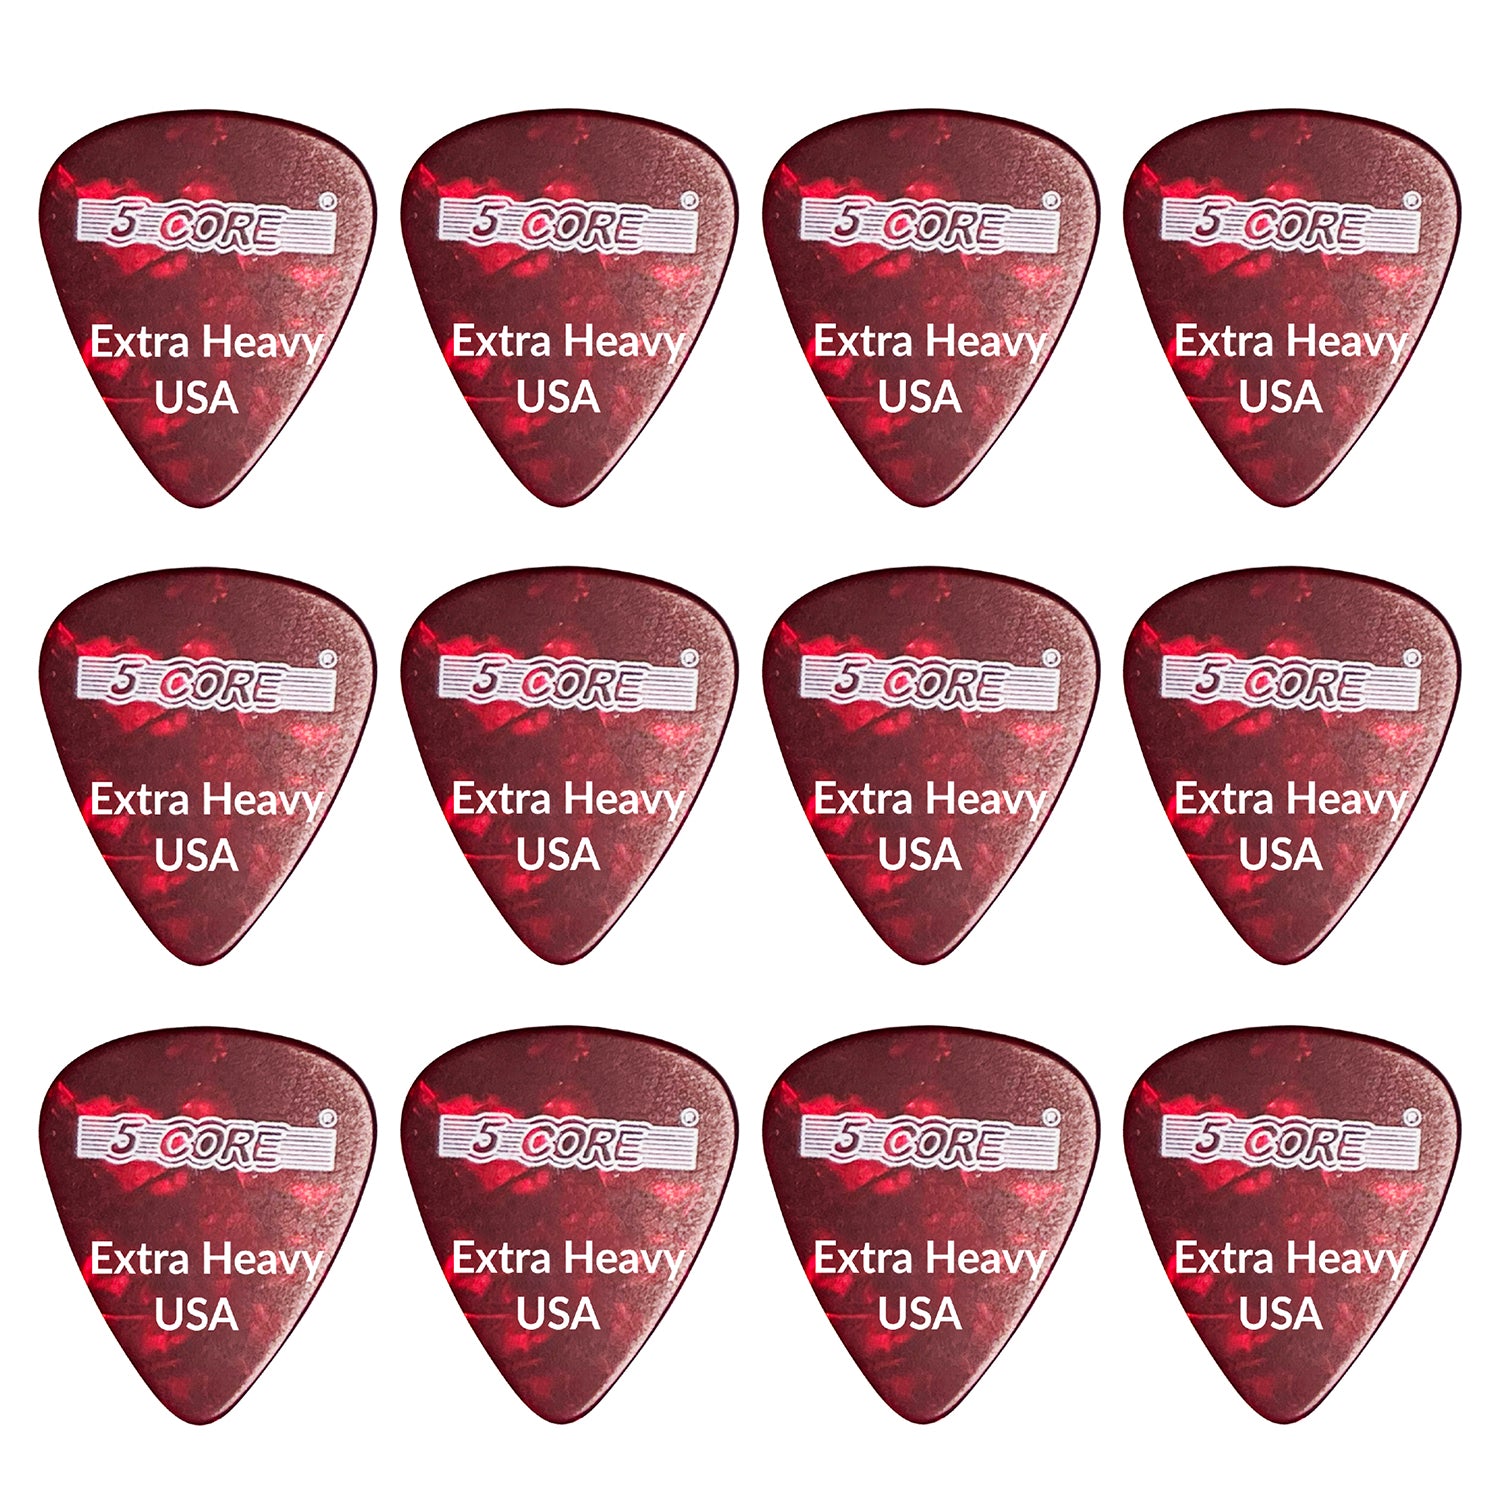 5 Core Celluloid Guitar Picks 12Pack Extra Heavy Gauge Plectrums for Acoustic Electric Bass Guitars